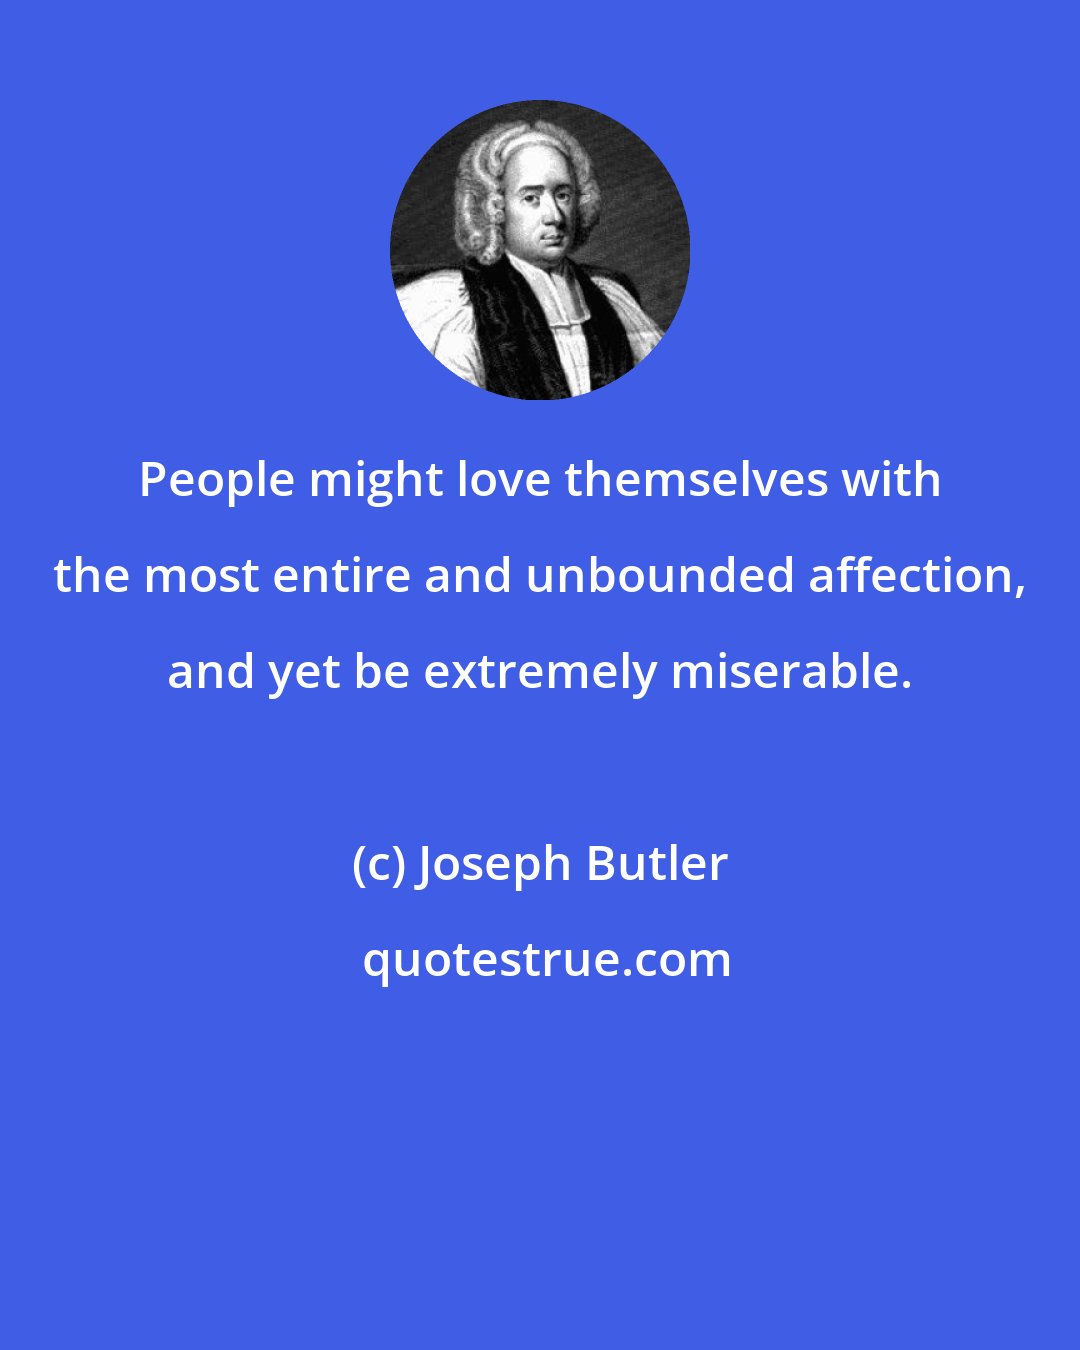 Joseph Butler: People might love themselves with the most entire and unbounded affection, and yet be extremely miserable.